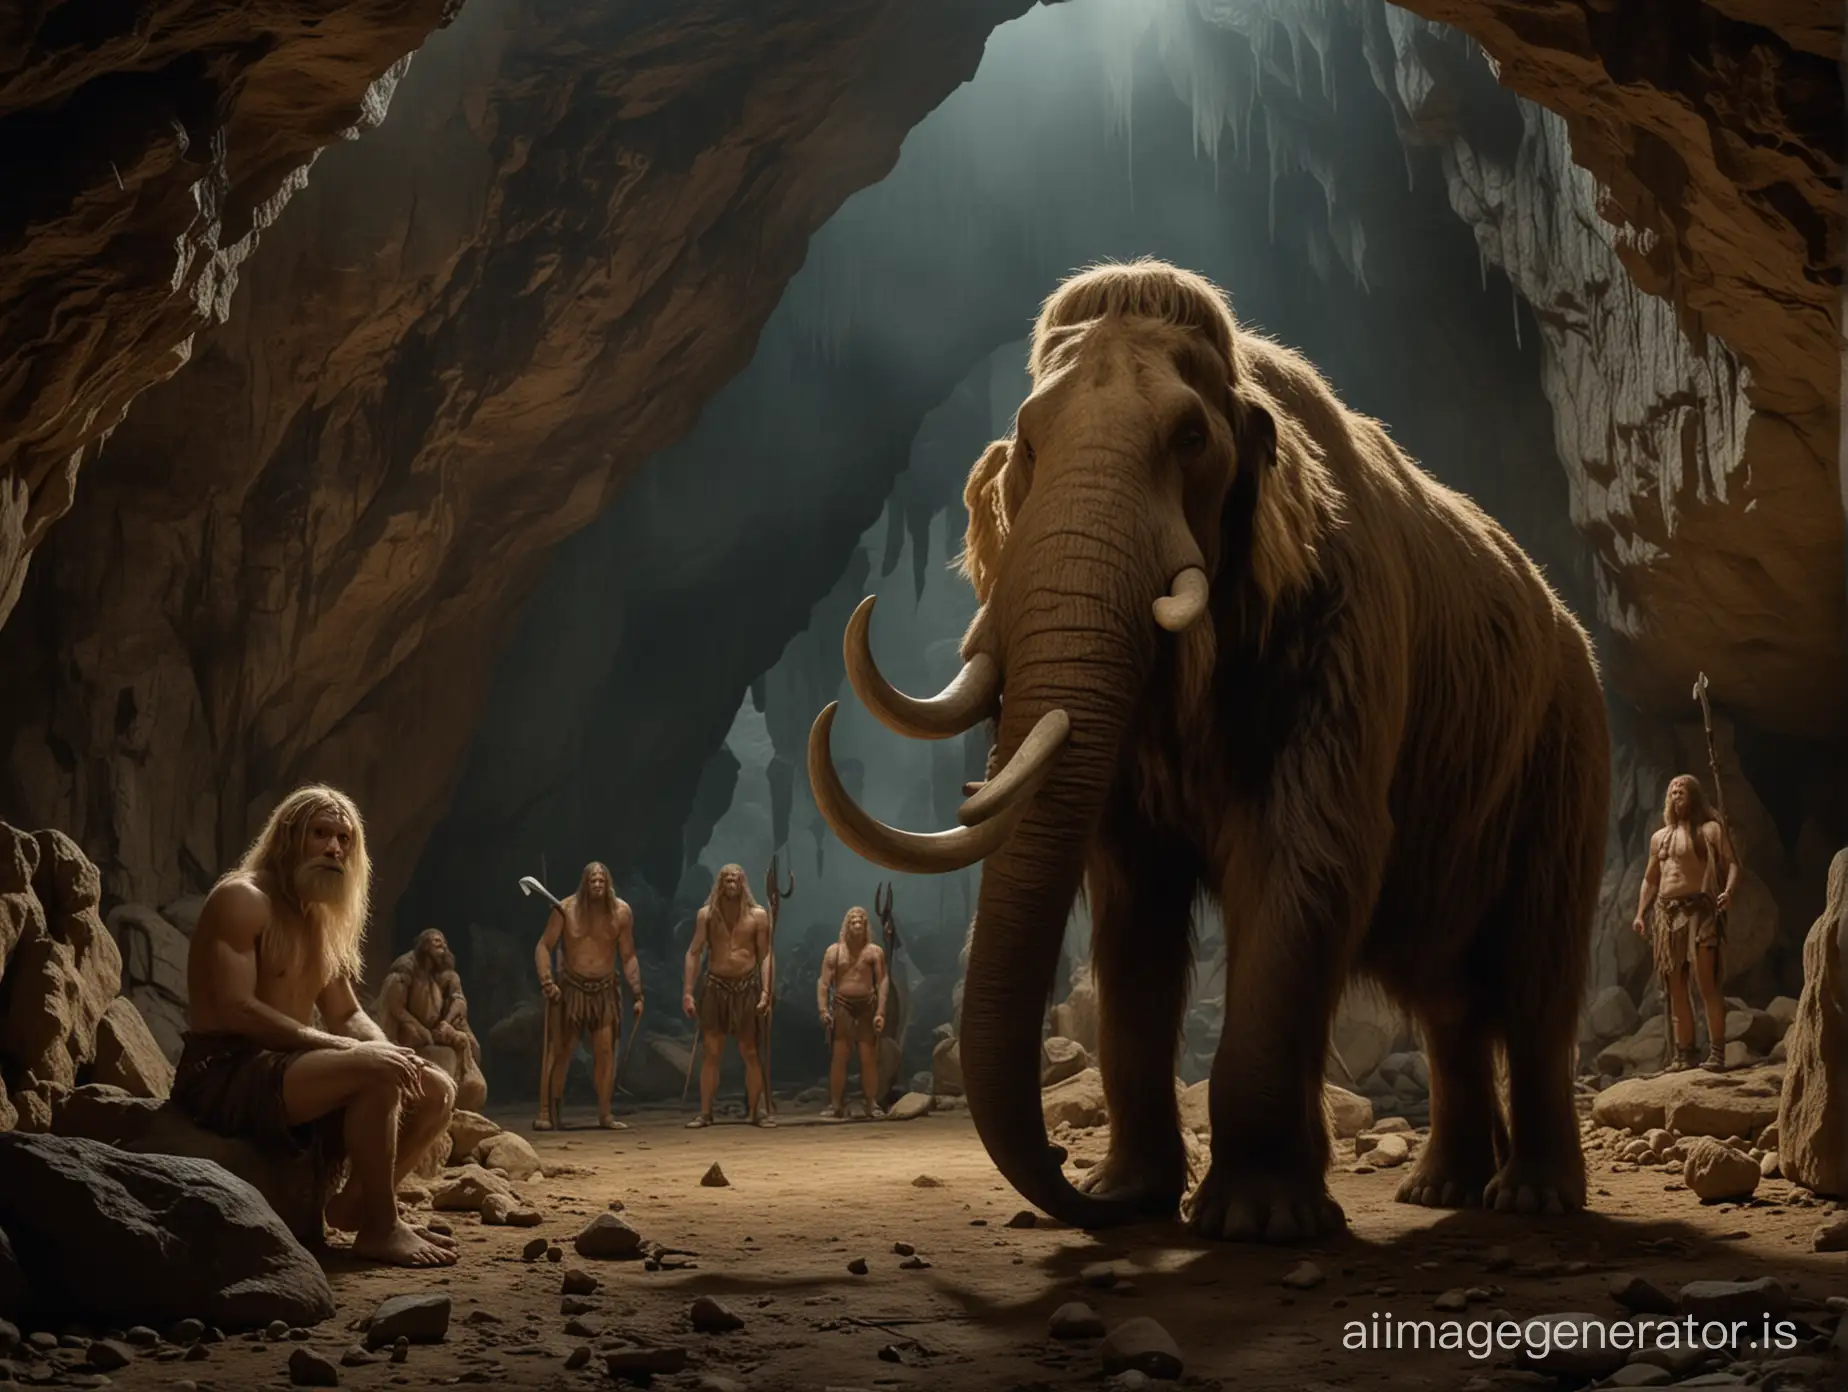 cinema scene in a cave, A tall and blond sapiens in the foreground look camera, far away in the background outside, outside a hairy mamouth surrounded by two Neanderthal warriors armed with large clubs::5 moonlight::3 